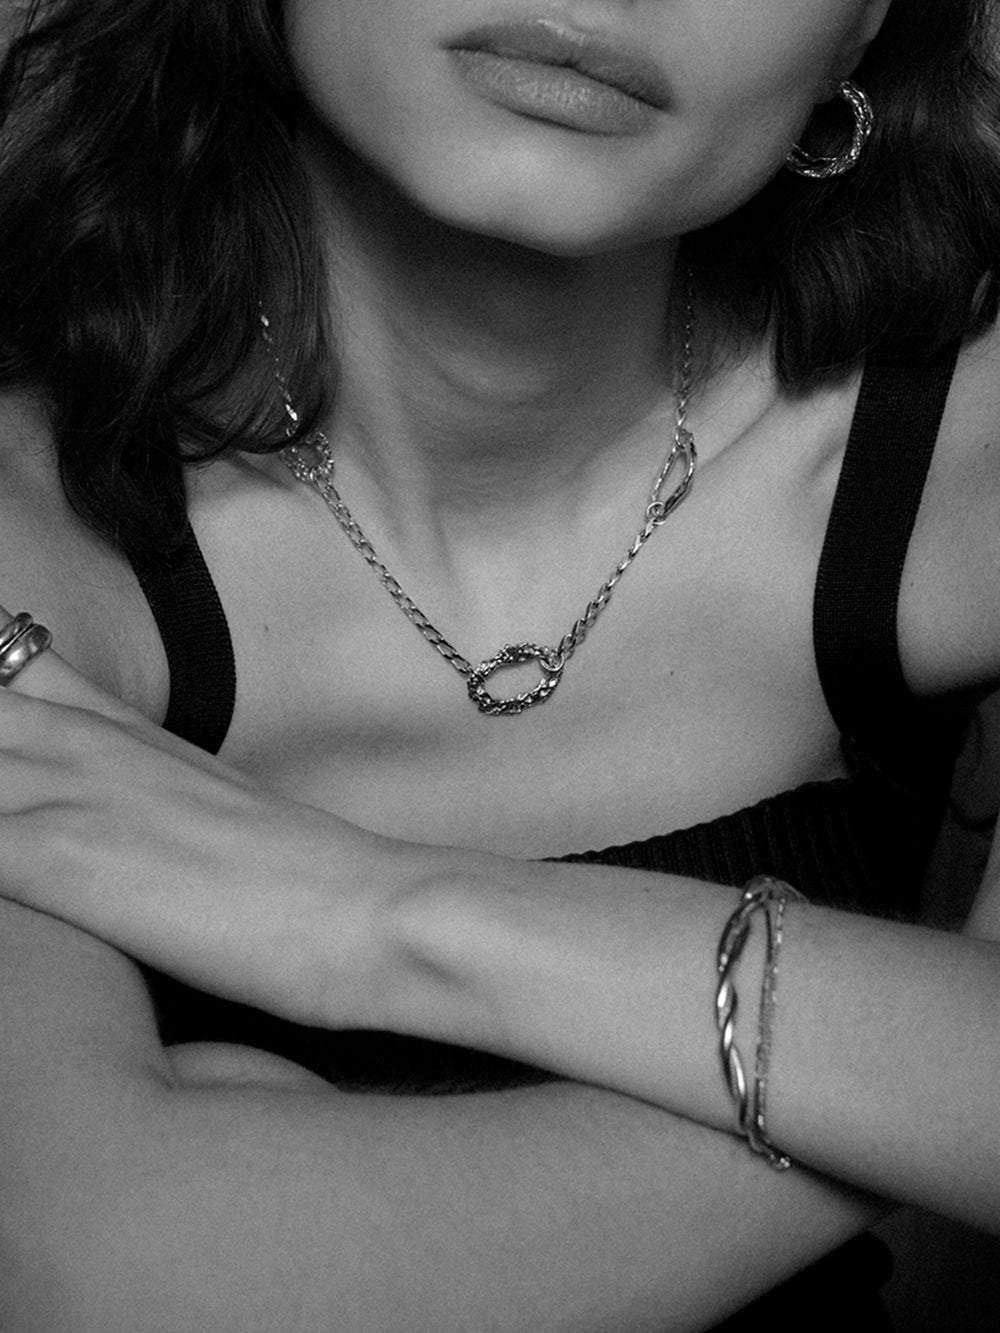 Chain of love | 925 Sterling Silver